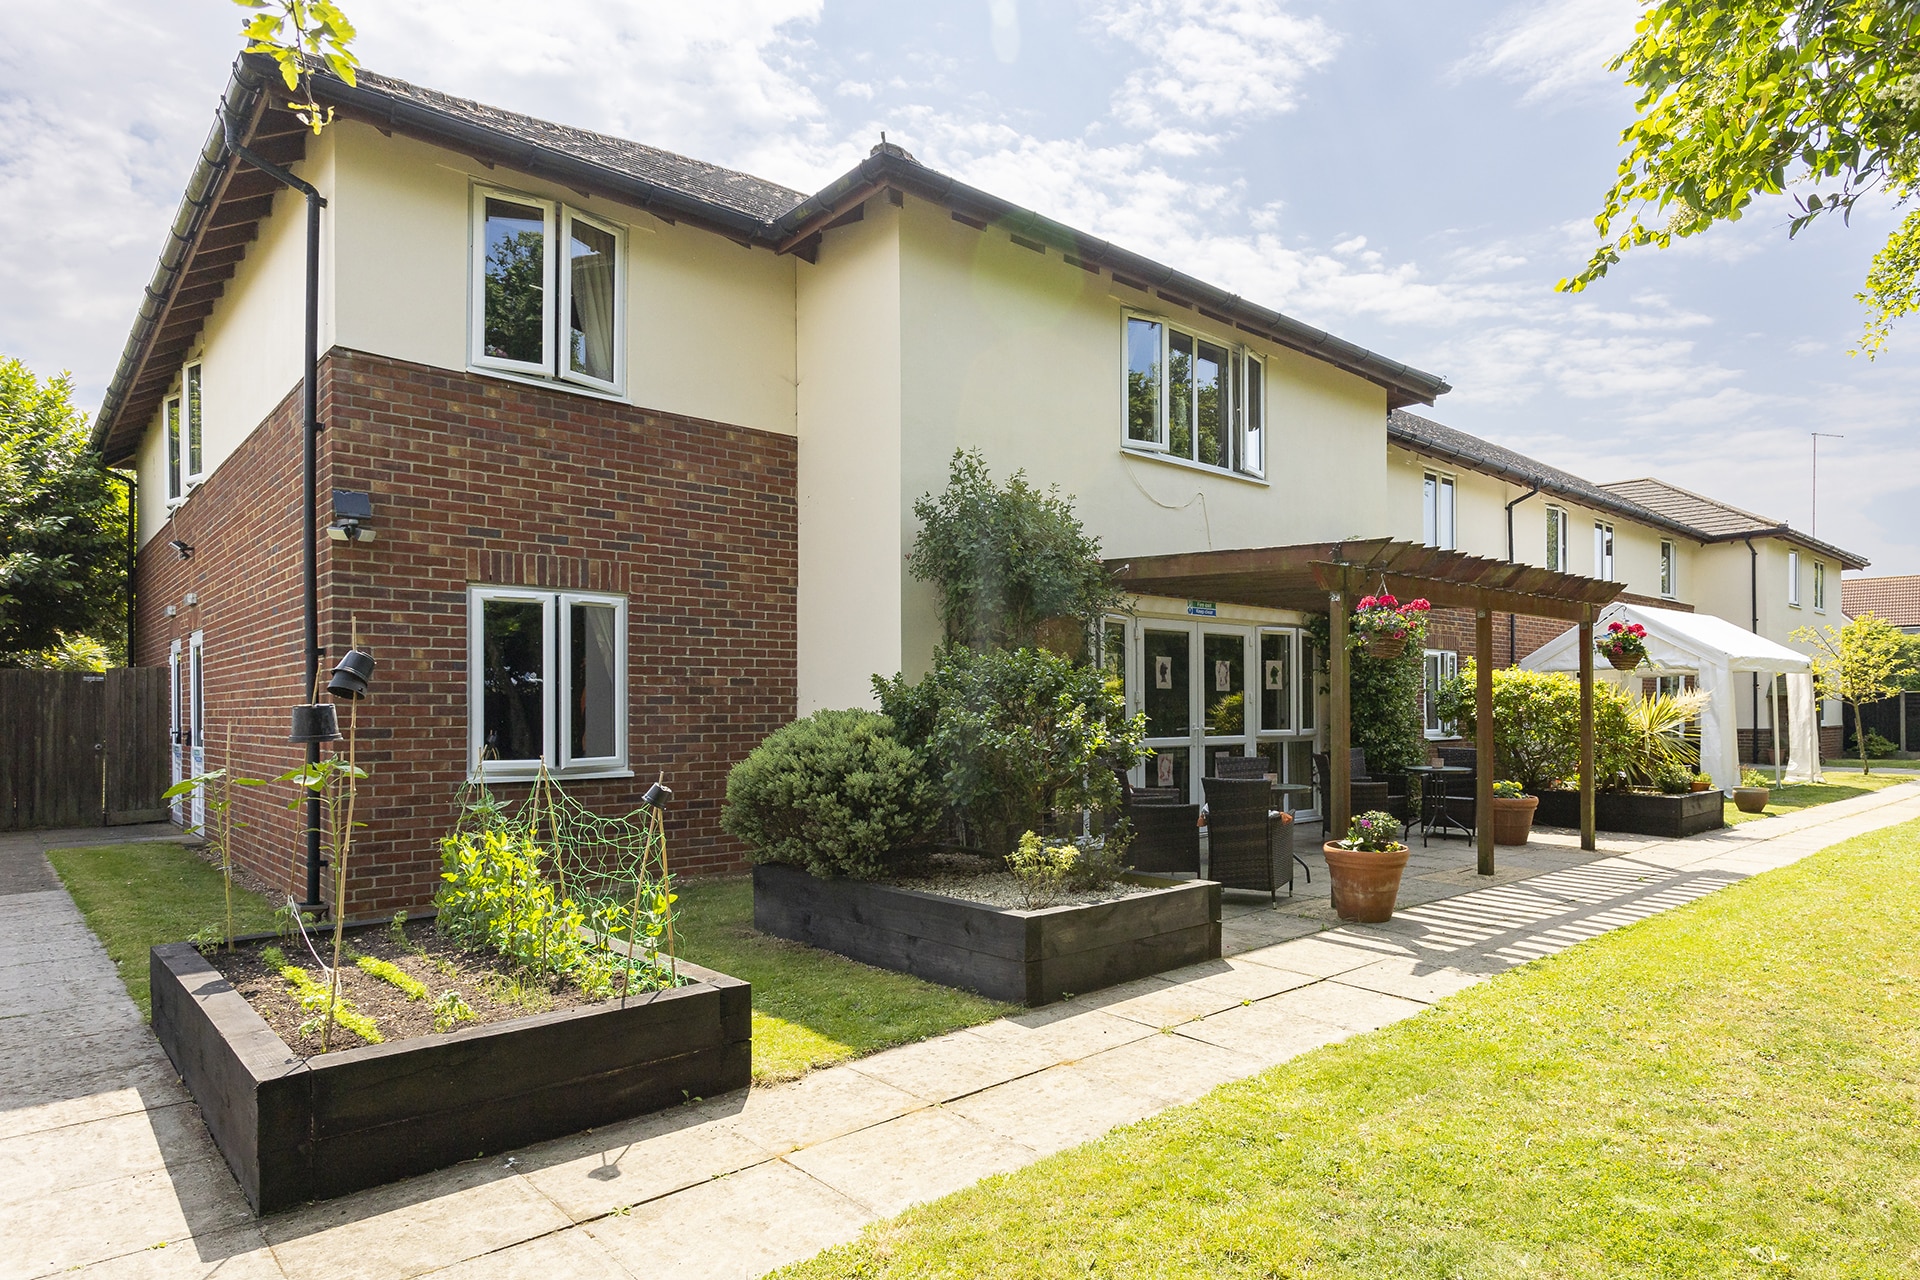 Rear view of Lily House Care Home in Ely with a view of the home's raised planters and garden terrace.